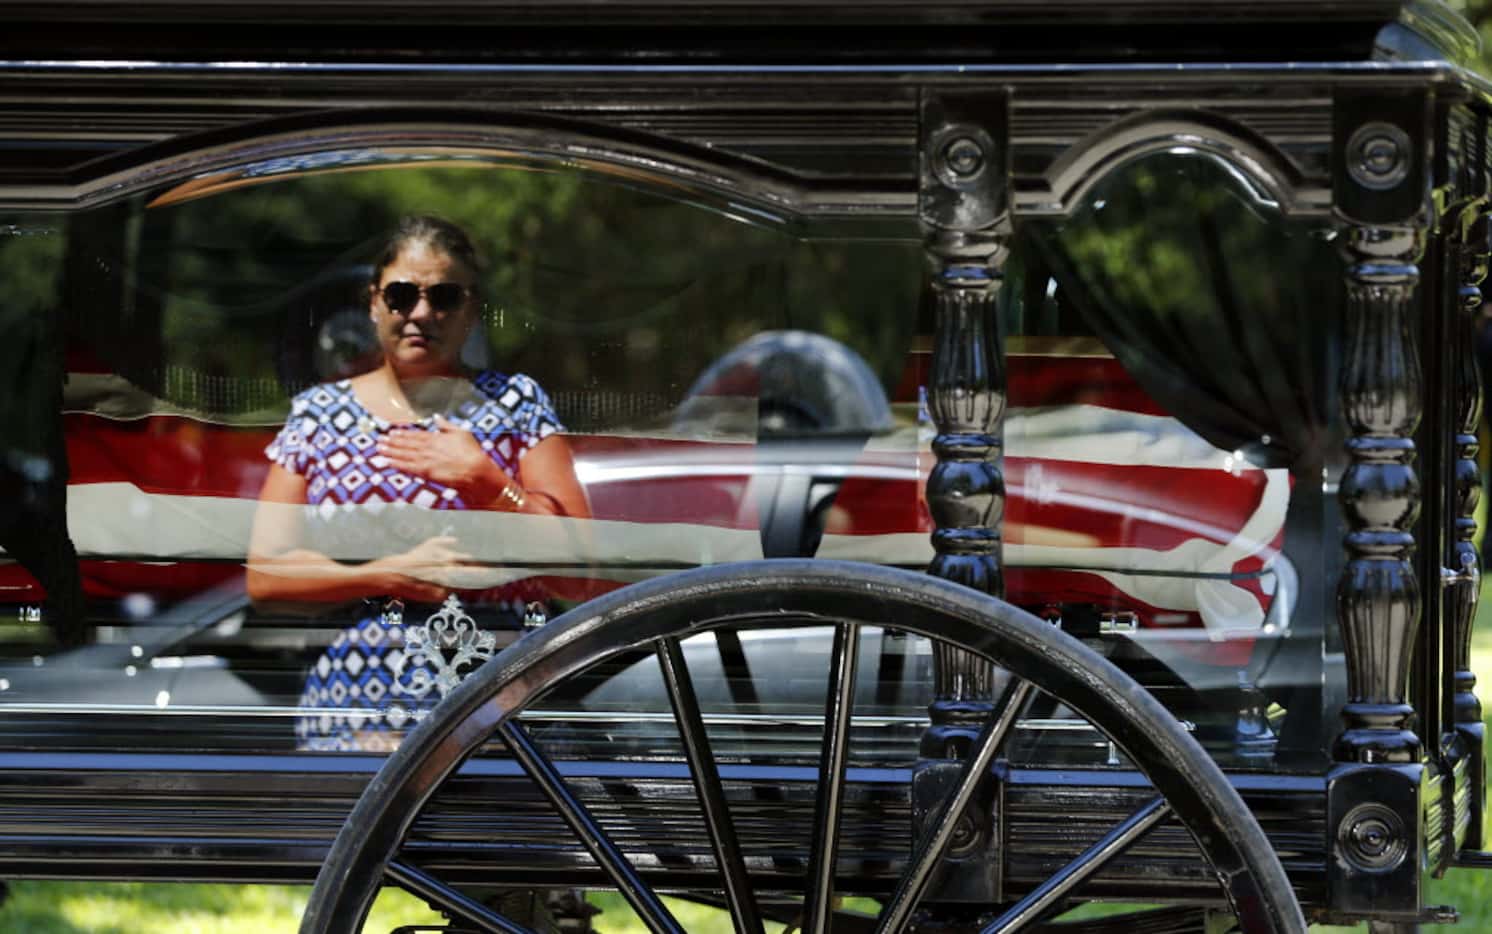 In the reflection of the horse-drawn caisson, a Smith family member places her hand over her...